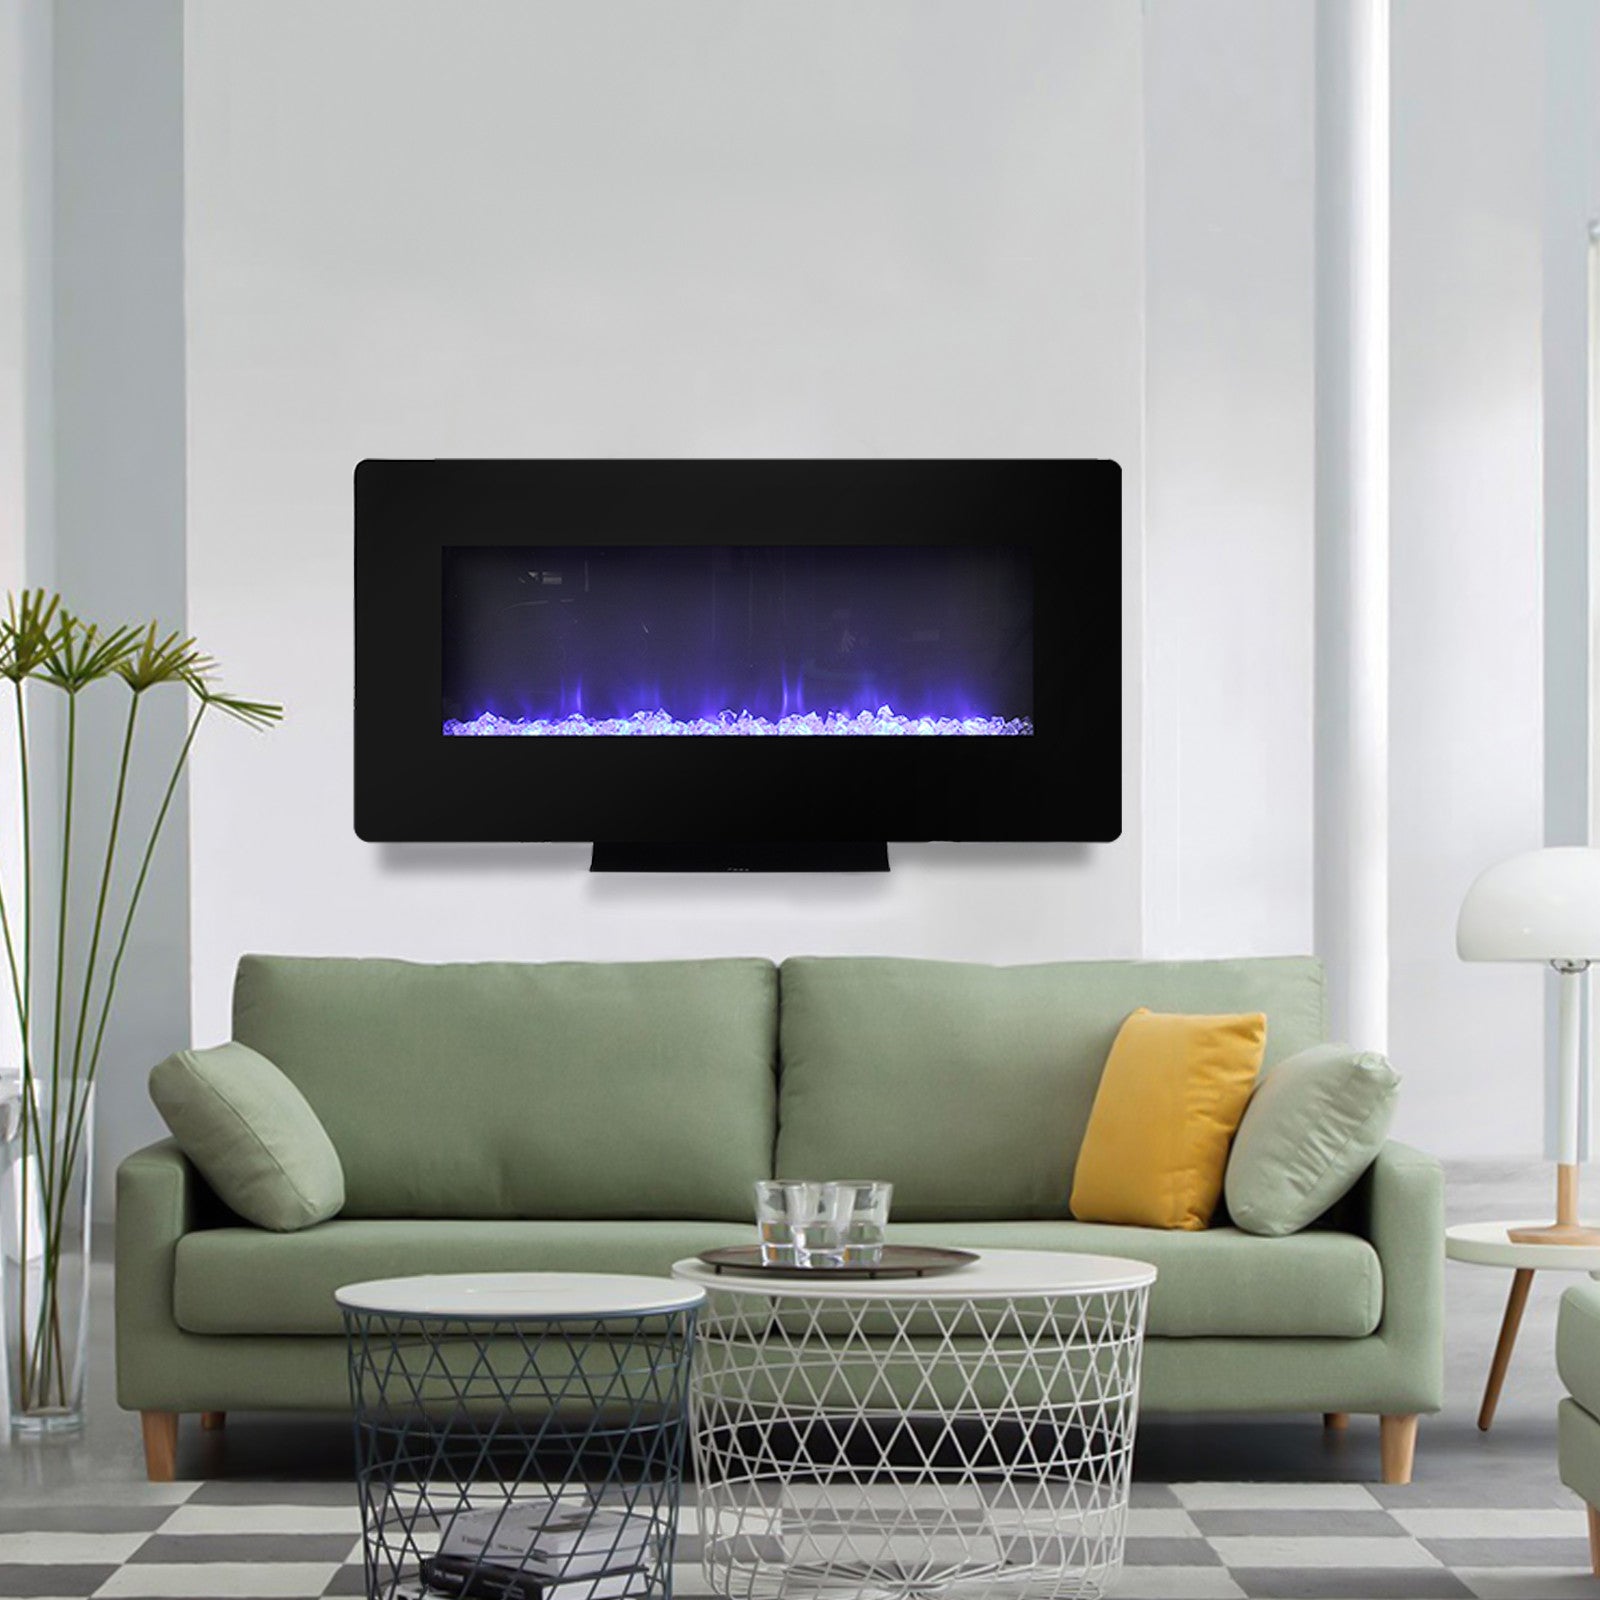 36 Inch Electric Fireplace With Timer,Adjustable Flame Color And Effects